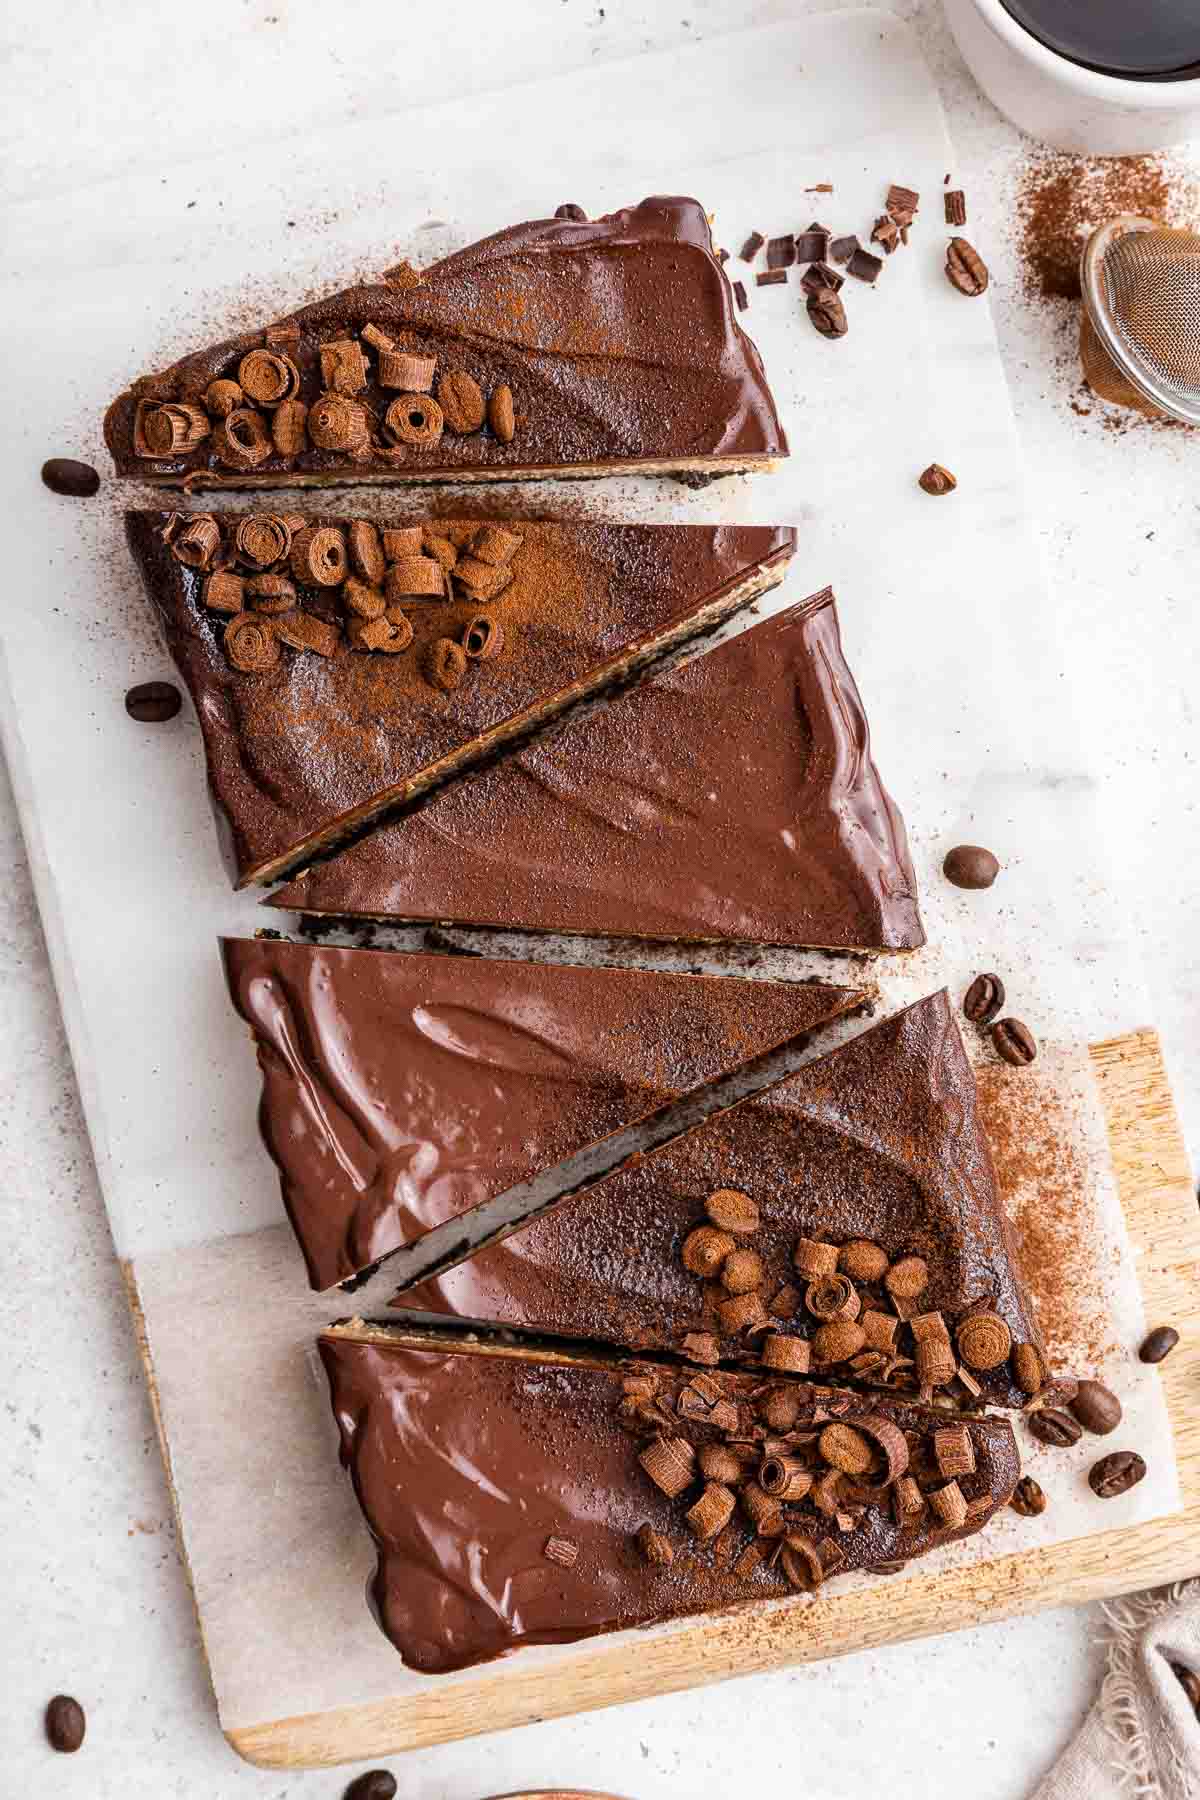 Six slices of a chocolate dessert decorated with ganache and chocolate curls.